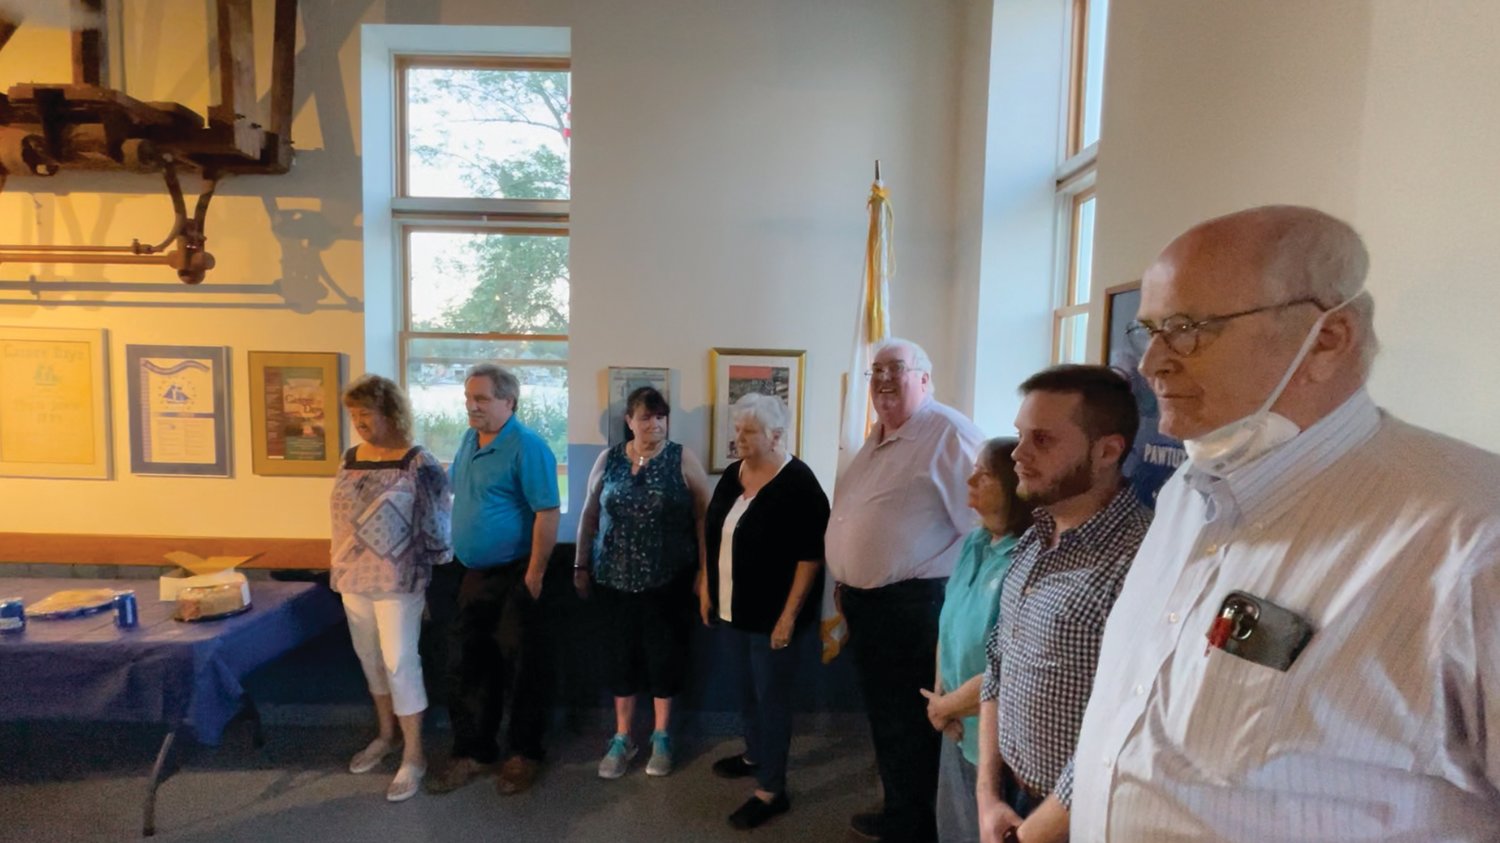 AN ‘HONOR GUARD’: The past presidents of the Gaspee Days Committee who were in attendance at last week’s ceremony gathered ahead of the swearing-in of the new officers. Mark Russell, the night’s emcee and one of the past presidents, said they would serve as an “honor guard” for the new slate.